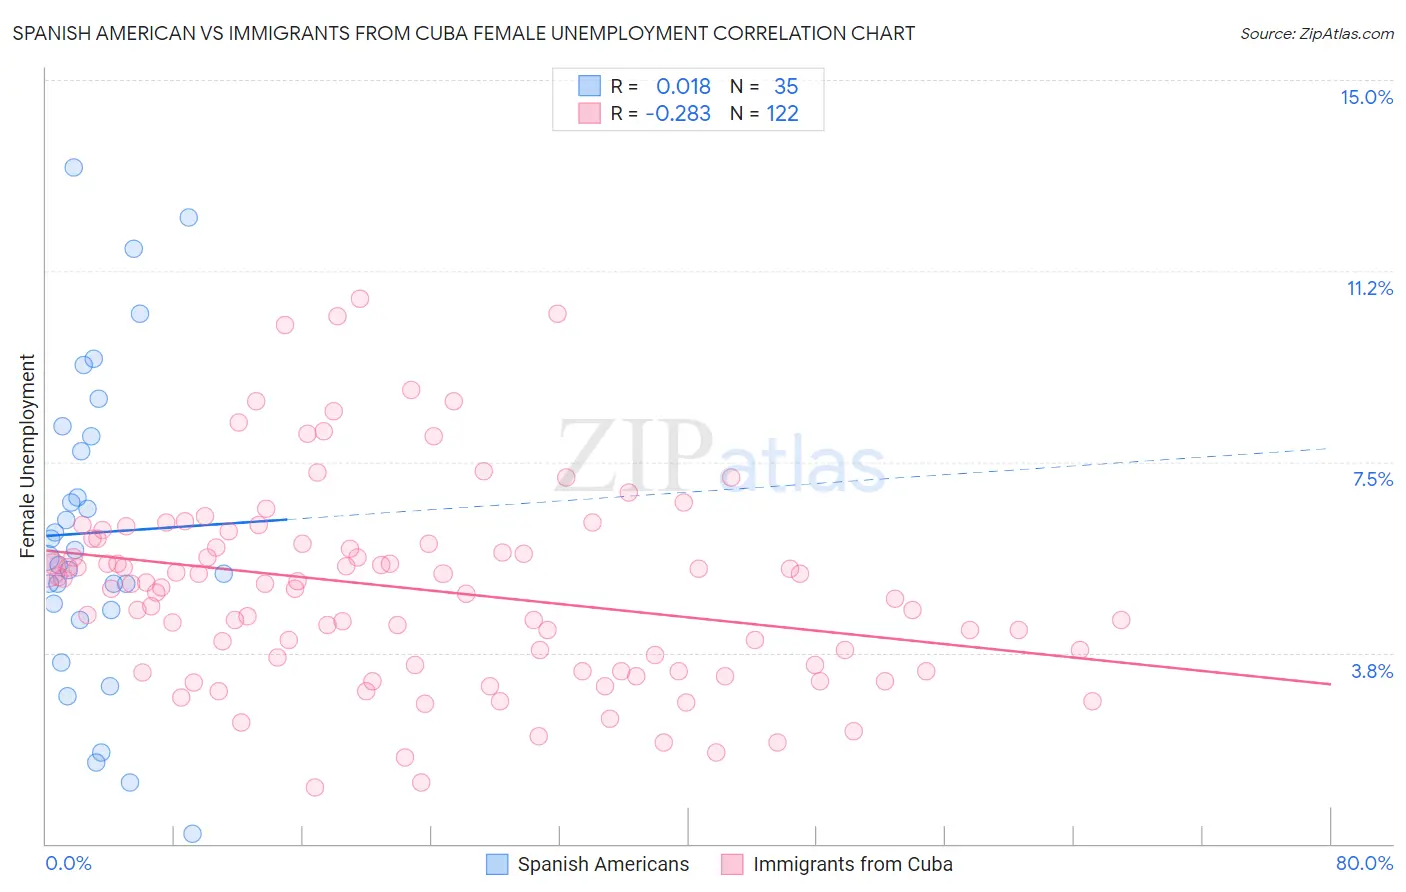 Spanish American vs Immigrants from Cuba Female Unemployment